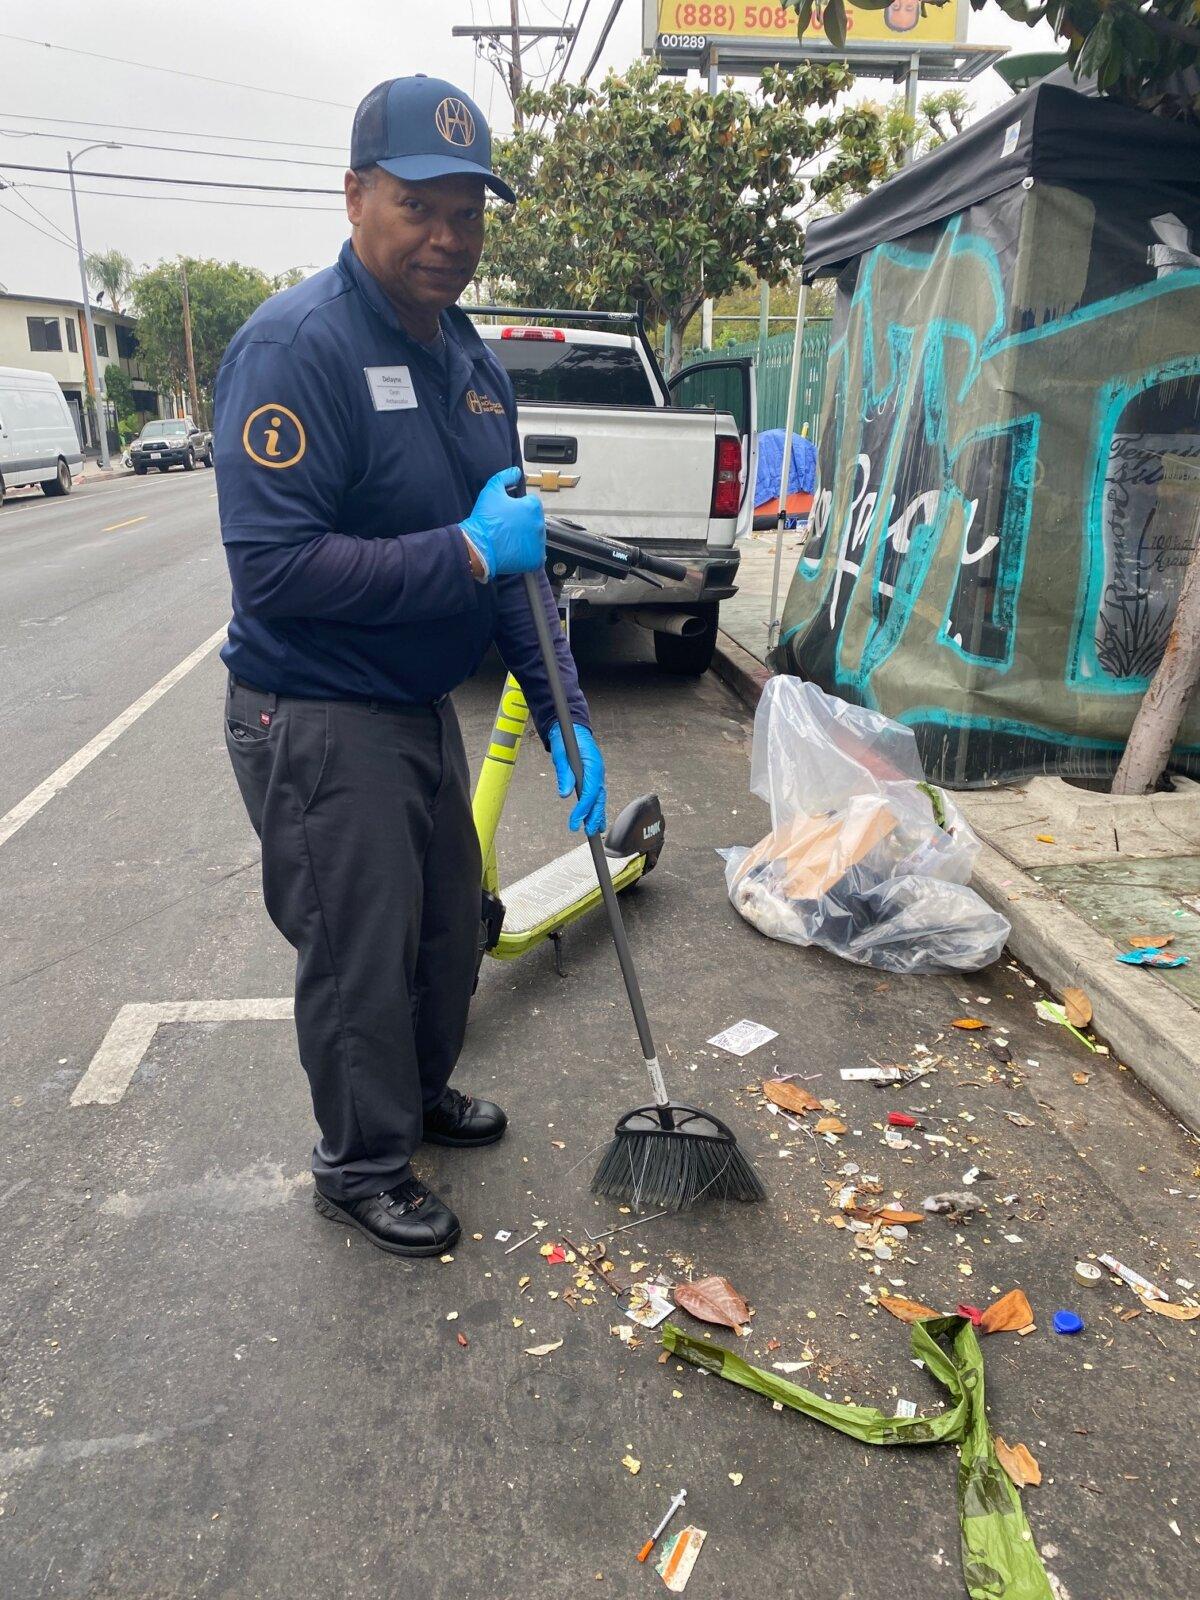 The Hollywood Partnership cleans up trash in Los Angeles. (Courtesy of Keith Johnson)